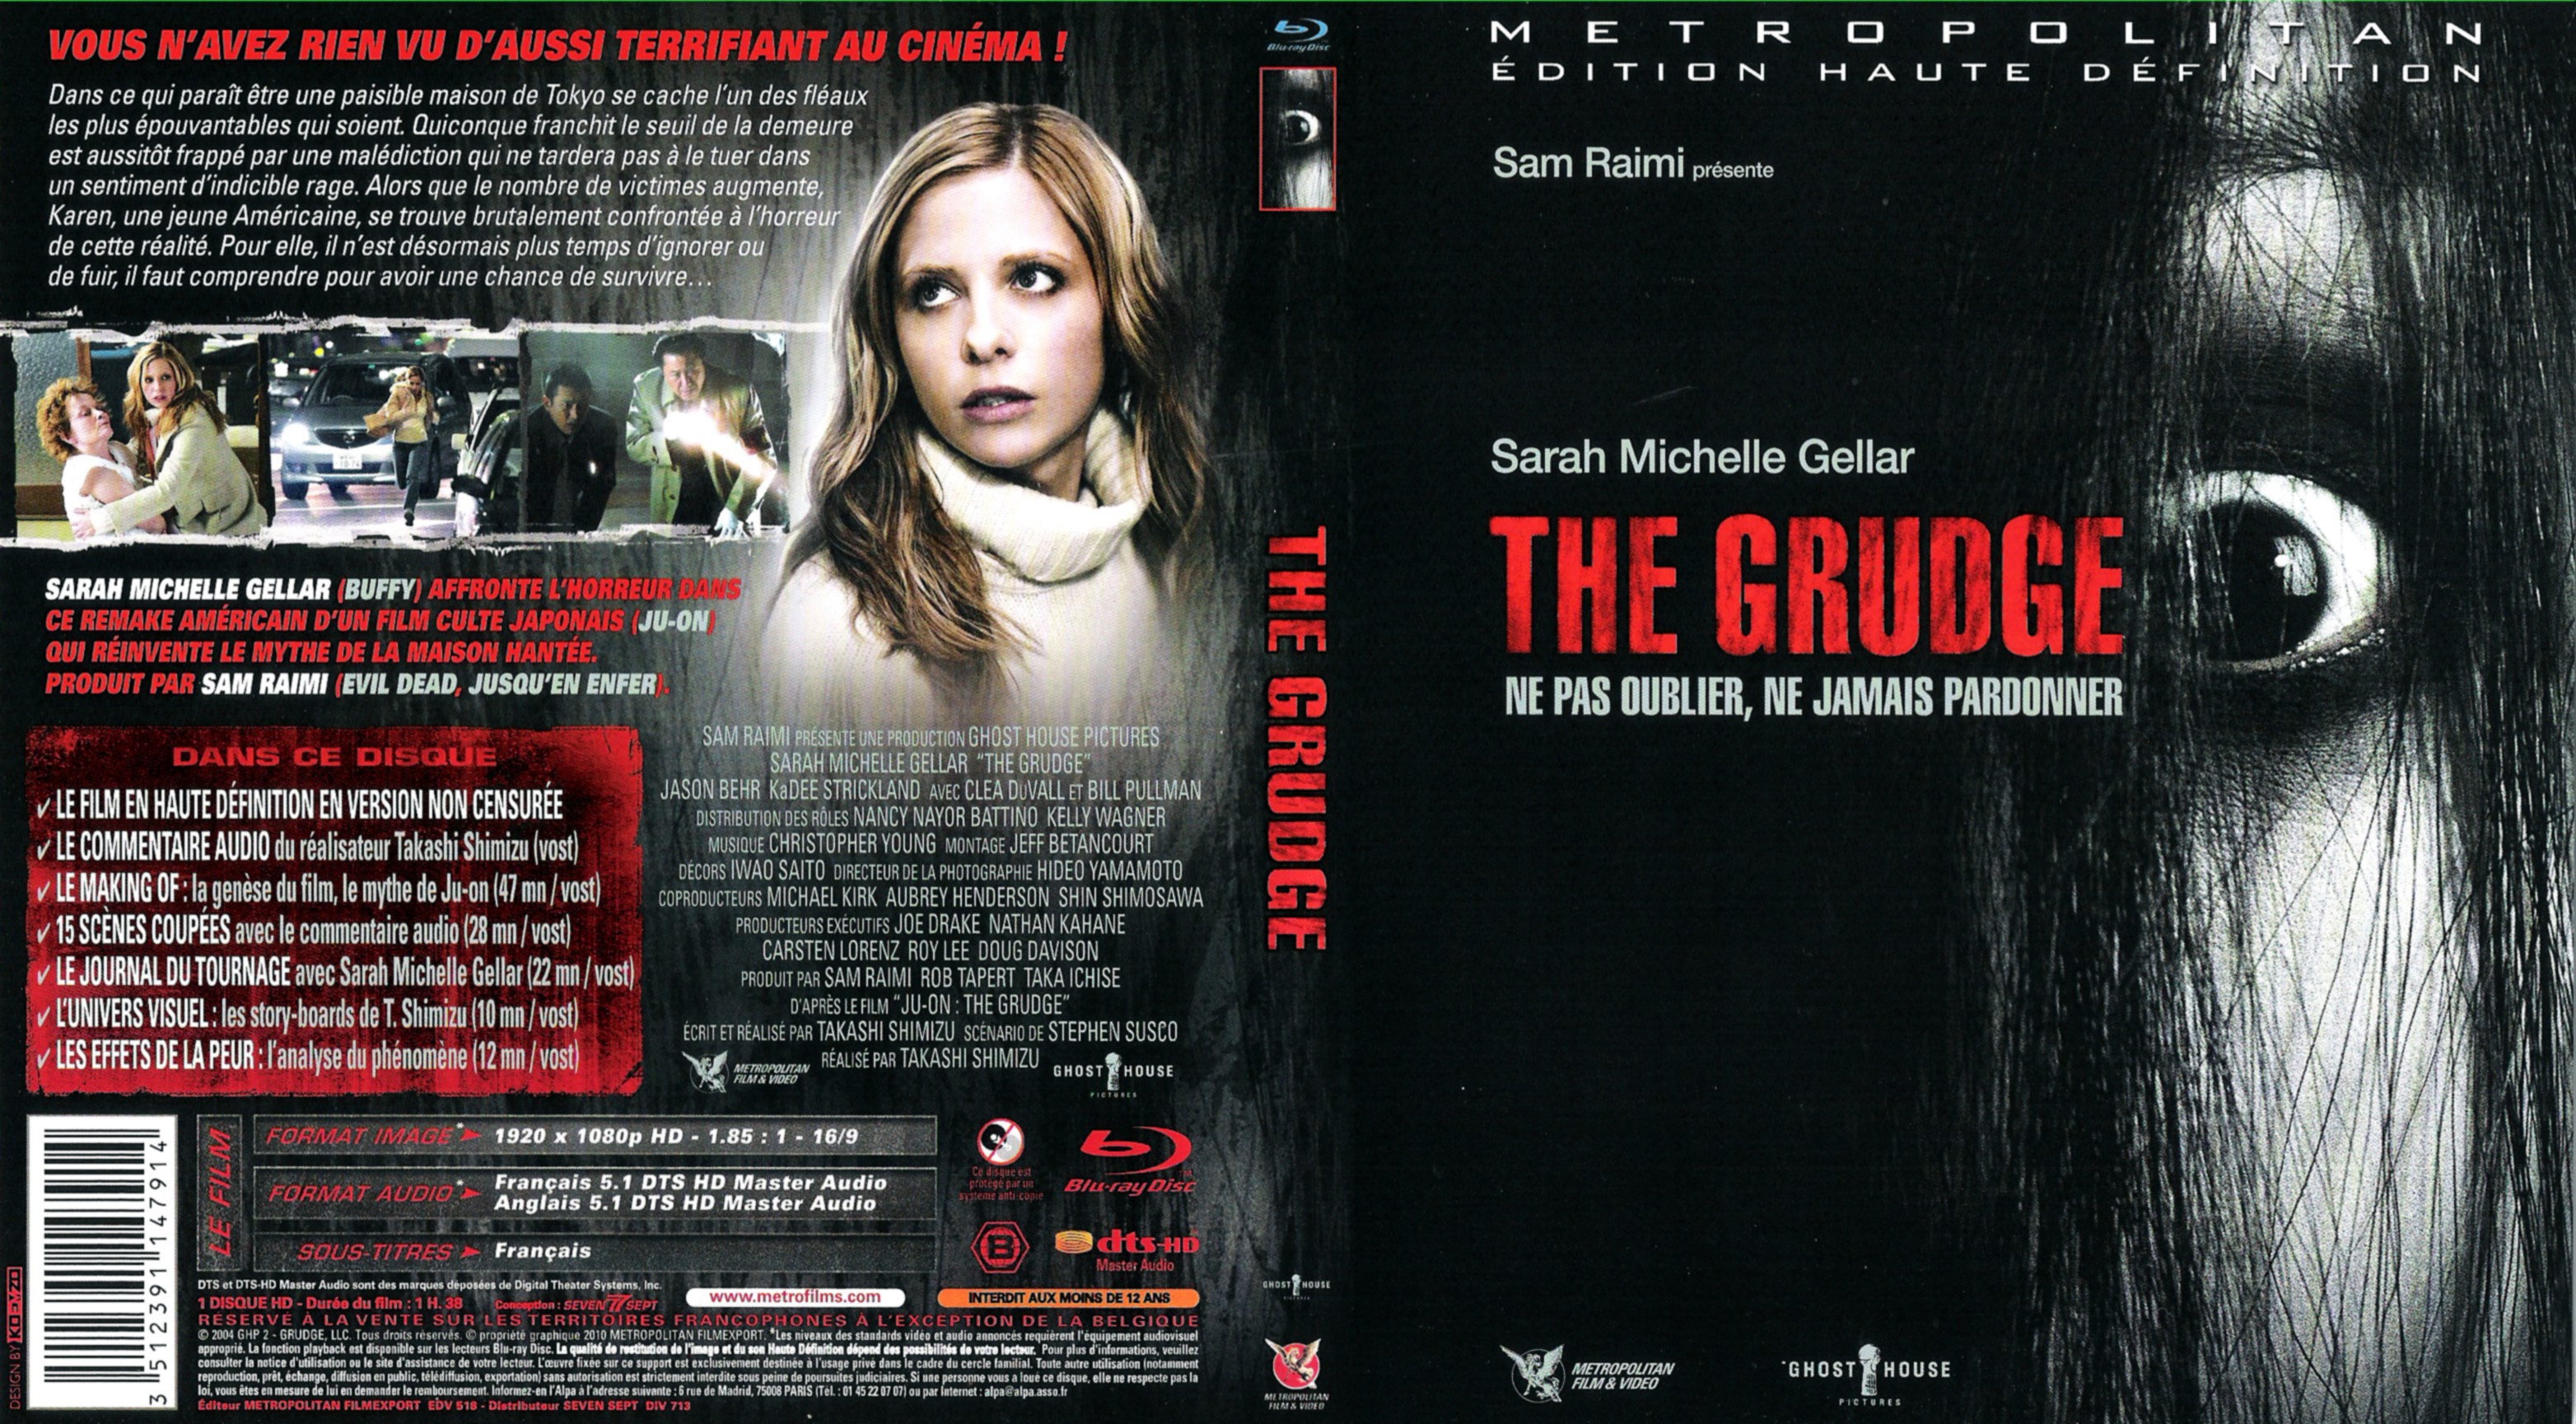 Jaquette DVD The grudge (BLU-RAY) v2